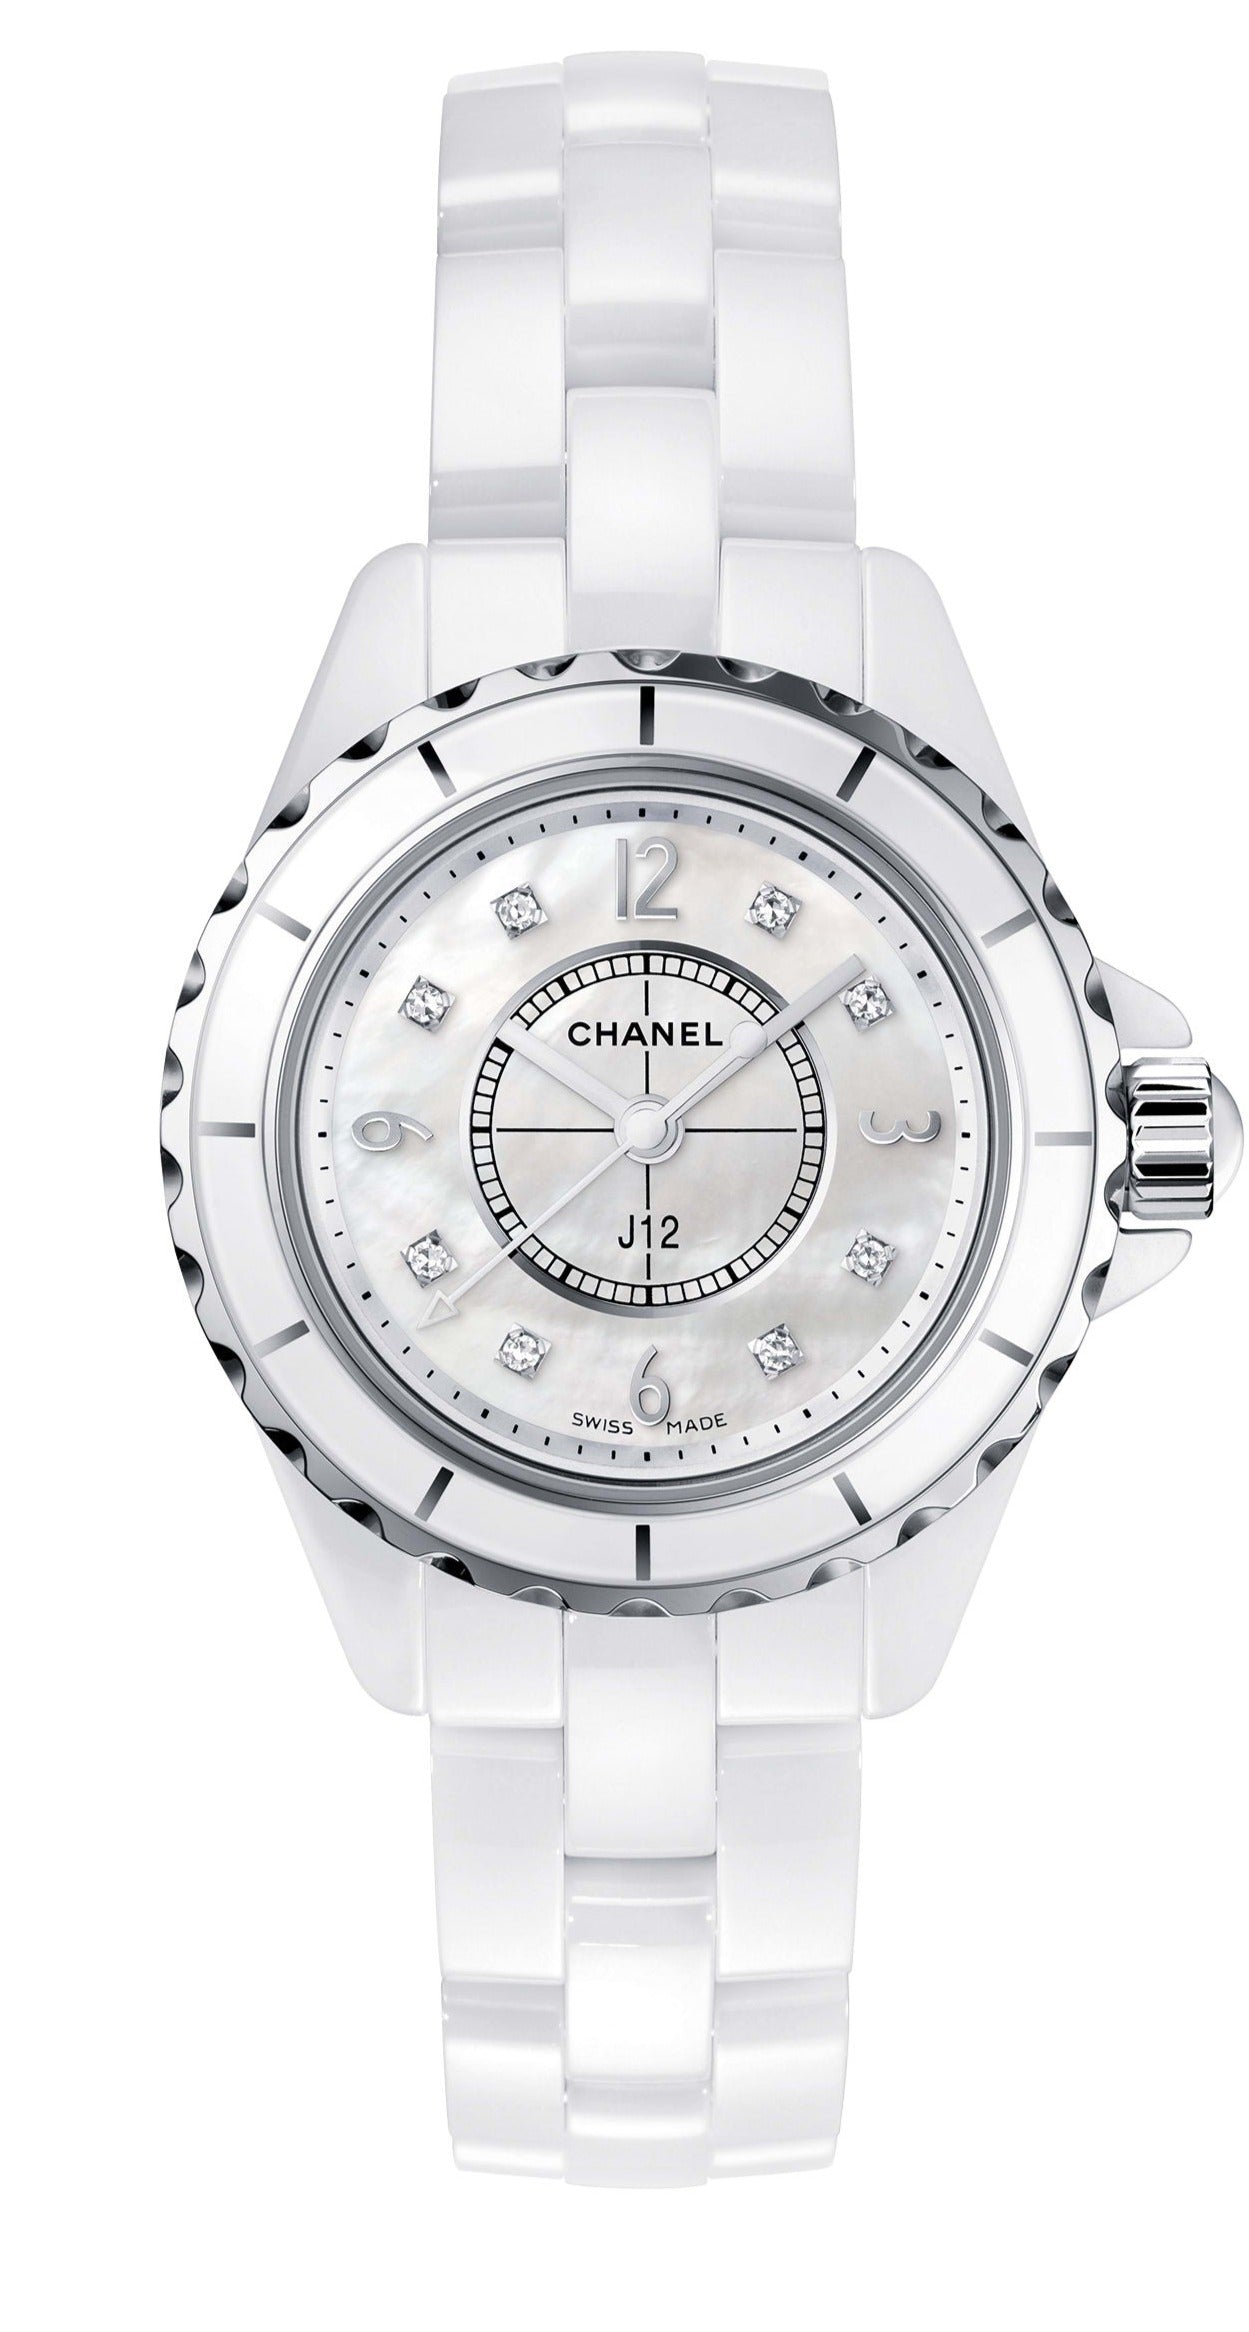 Chanel H2570 J12 Mother of Pearl White Ceramic Ladies Watch